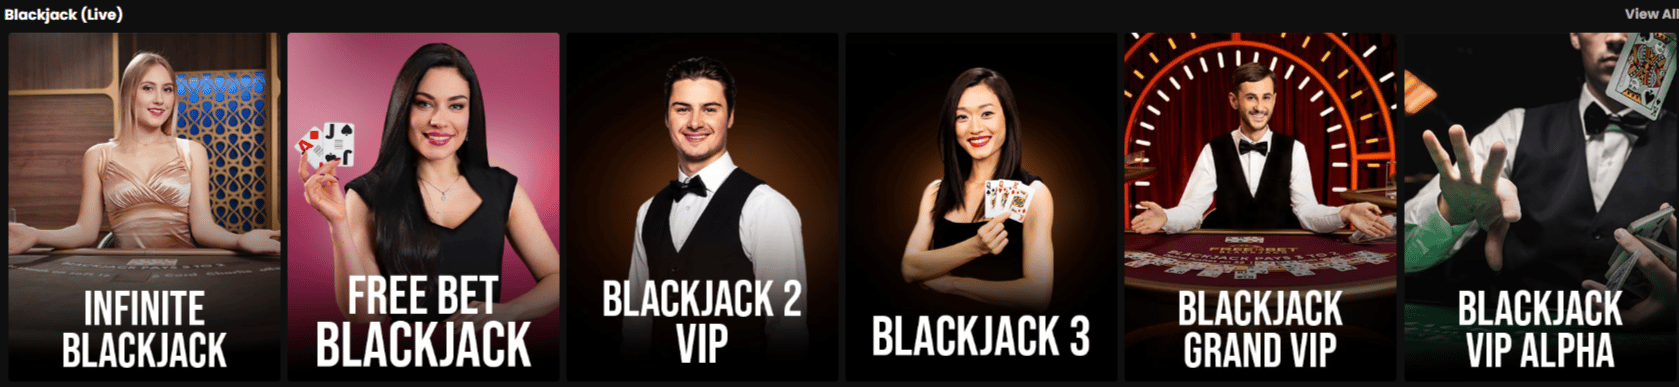 BlackJack pay and play casino